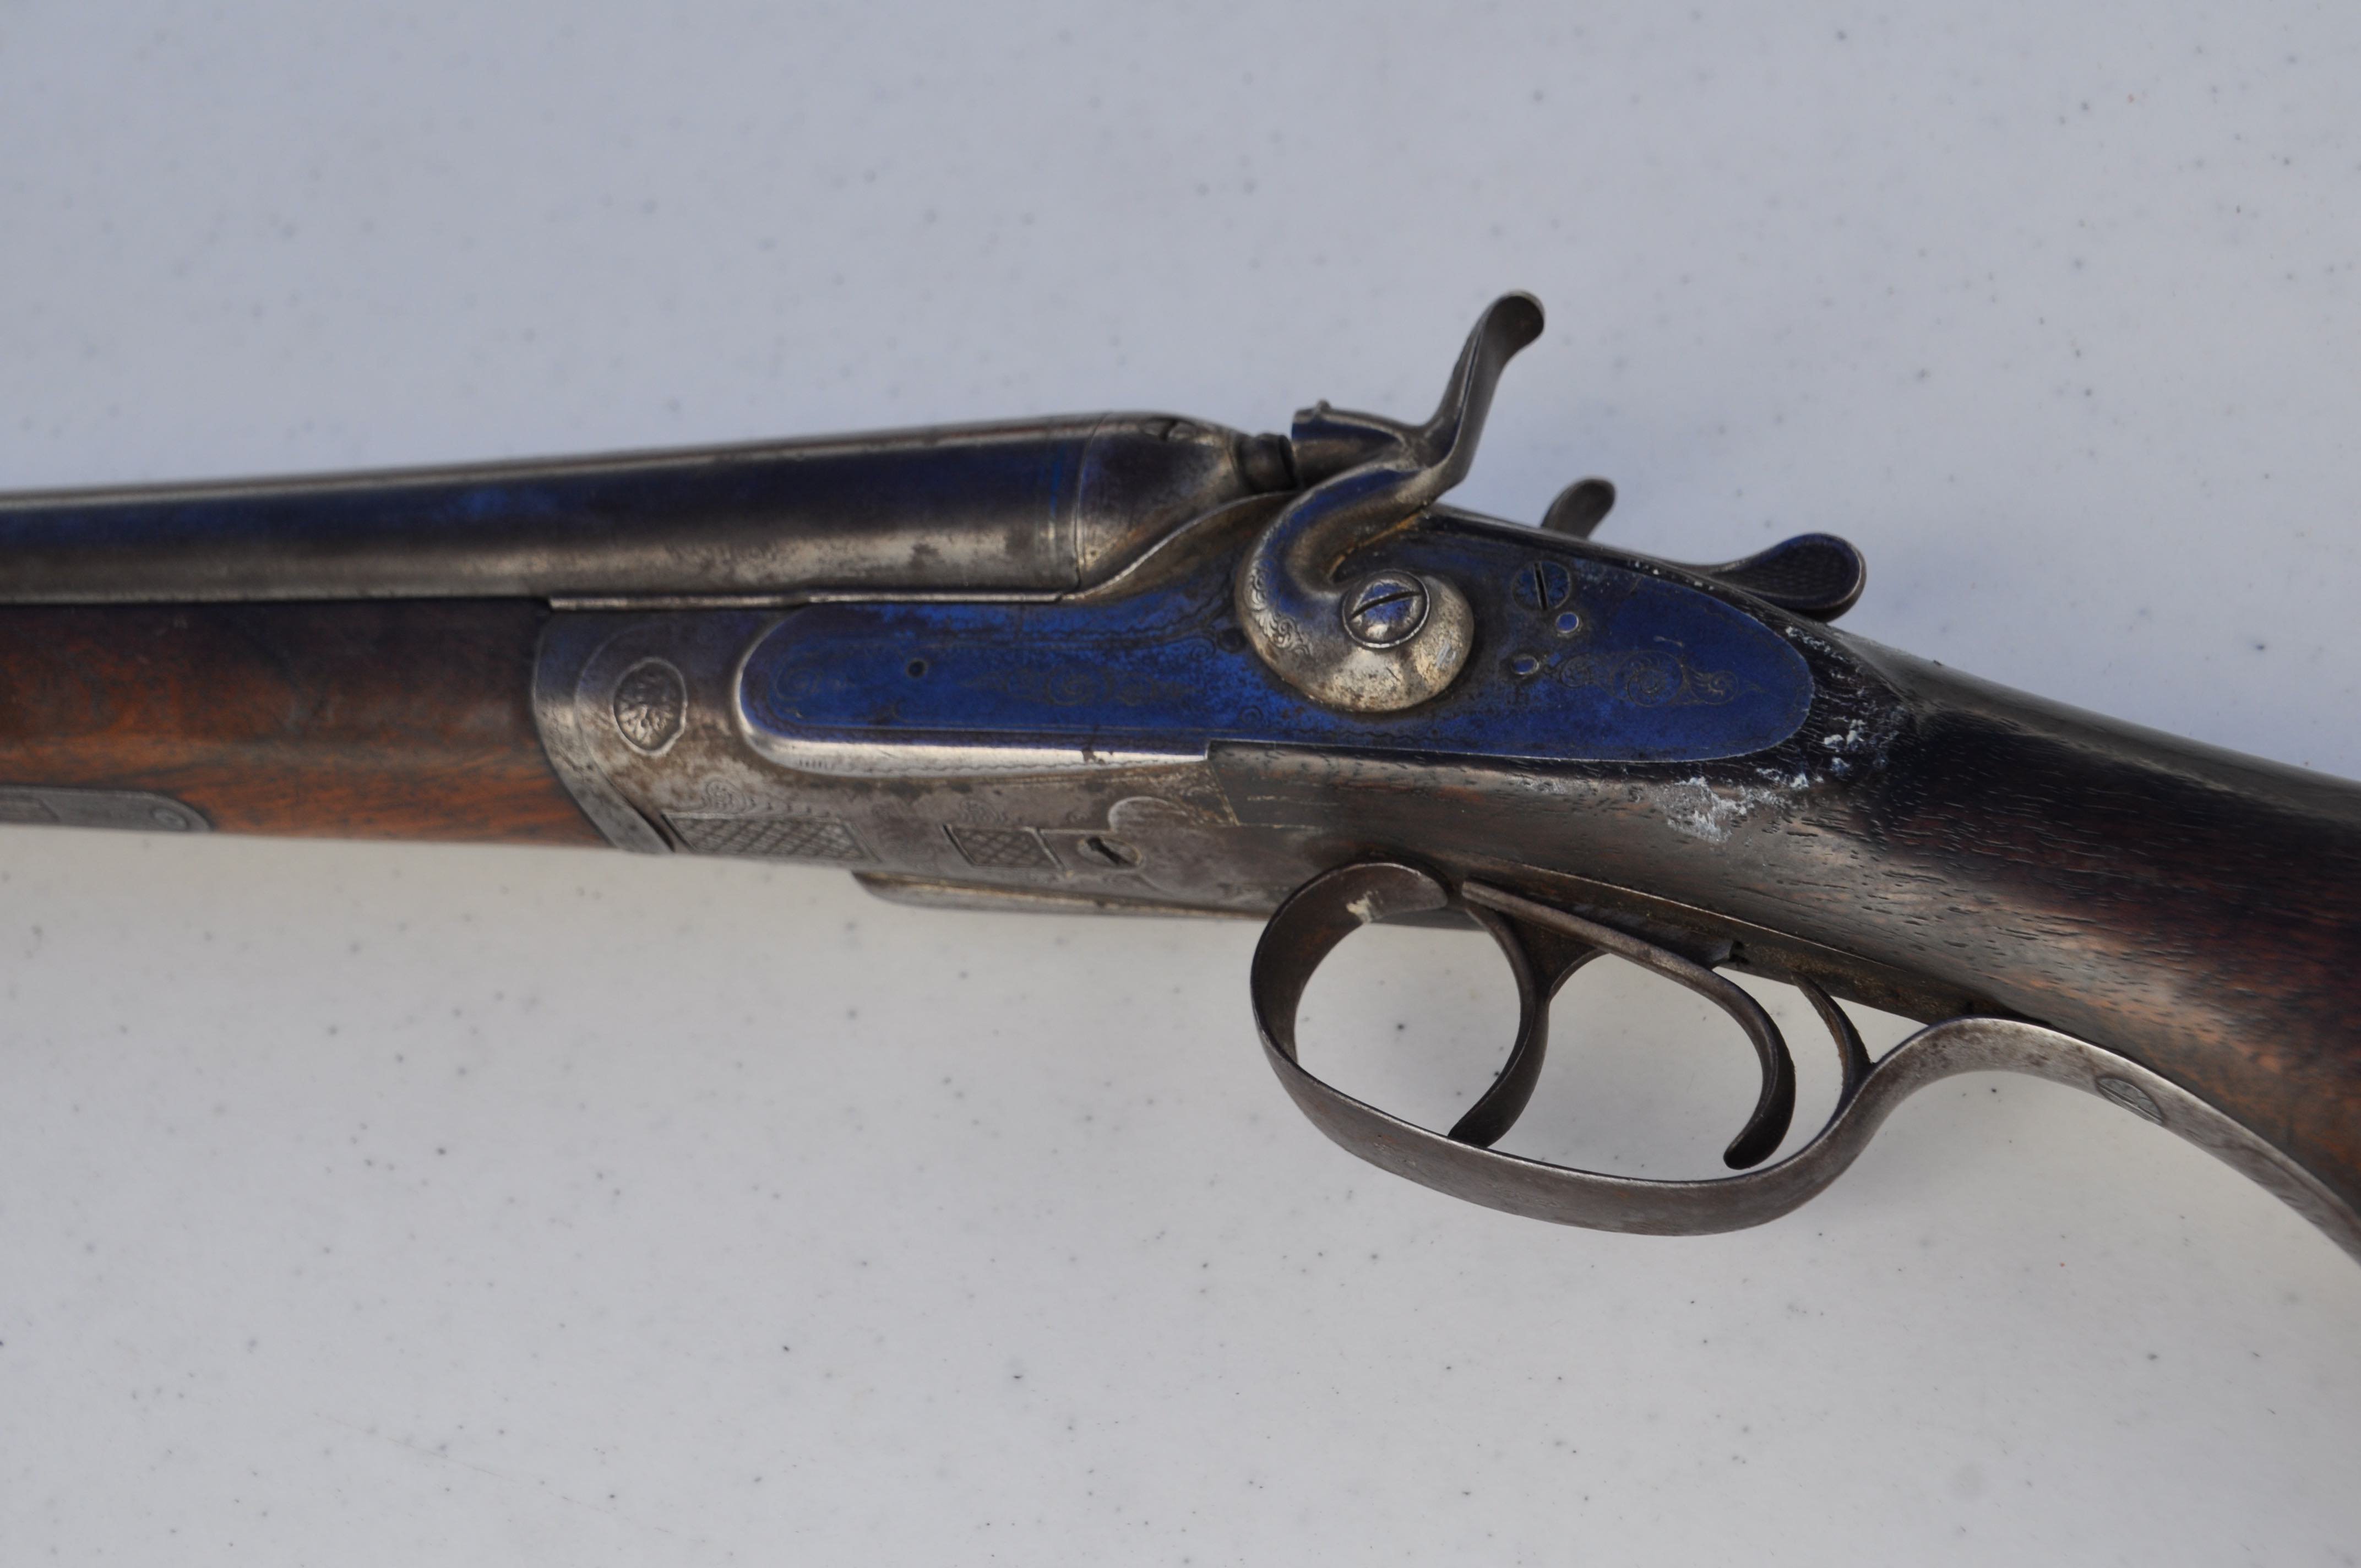 I. Introduction to Antique Firearms